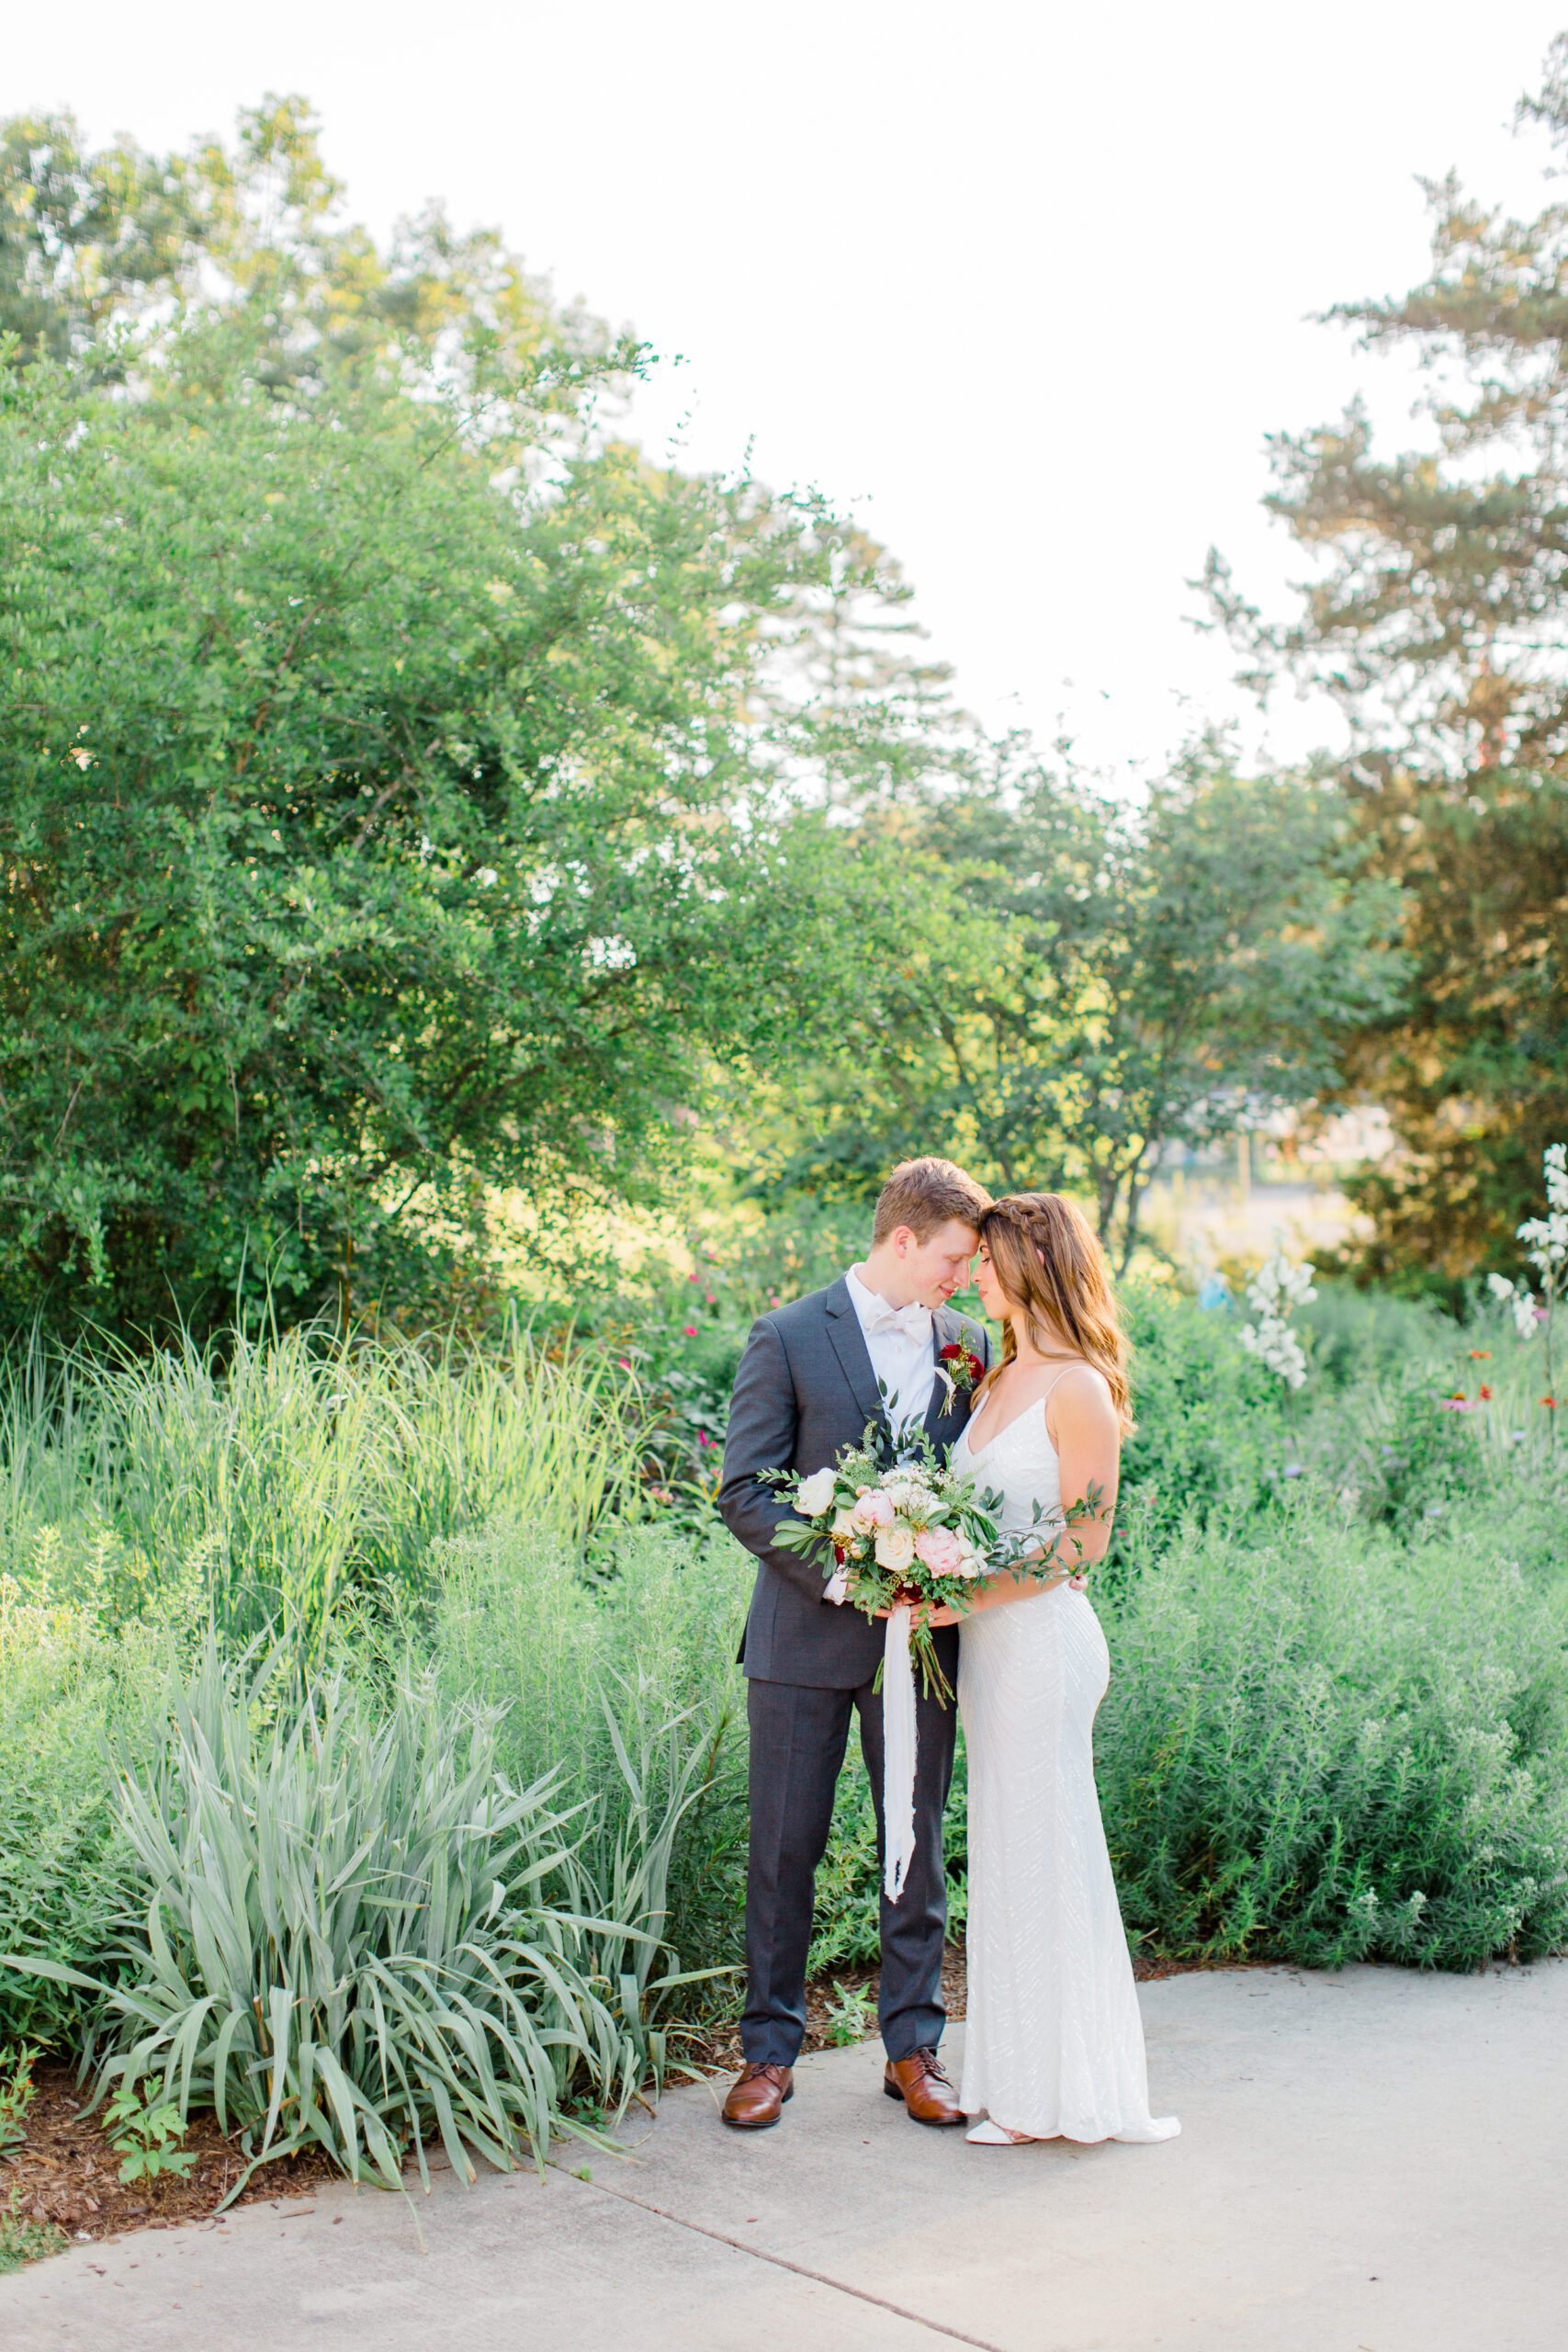 Kaley and Graham (Kelsey Fike Photography)